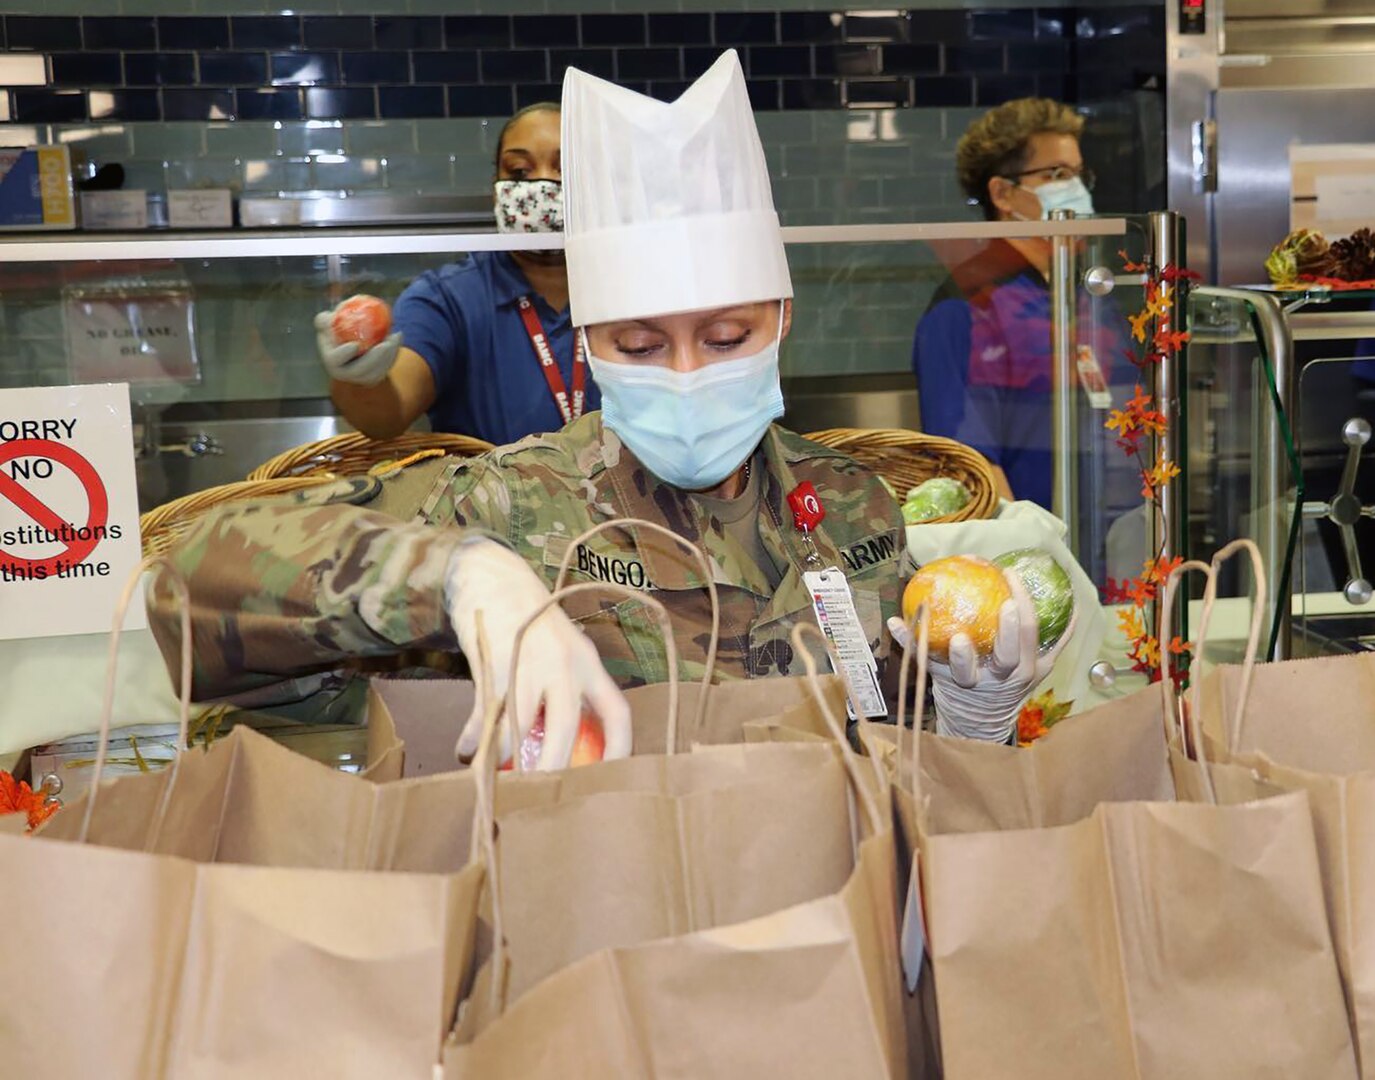 Army Sgt. 1st Class, Maité Bengoa, Enlisted Advisor to the Deputy Commander for Health and Readiness, Brooke Army Medical Center, fills a five-bag fruit order in the serving line for a staff member as part of their pre-packaged Thanksgiving Day meal Nov. 26.